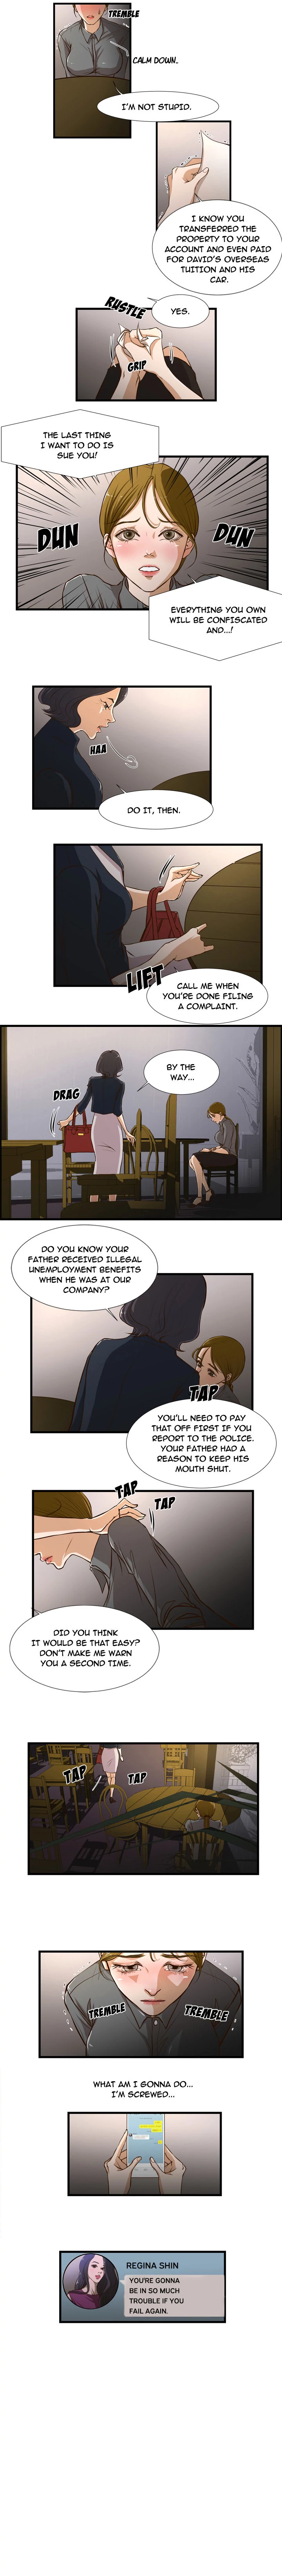 The Taste of Money - Chapter 1 Page 5